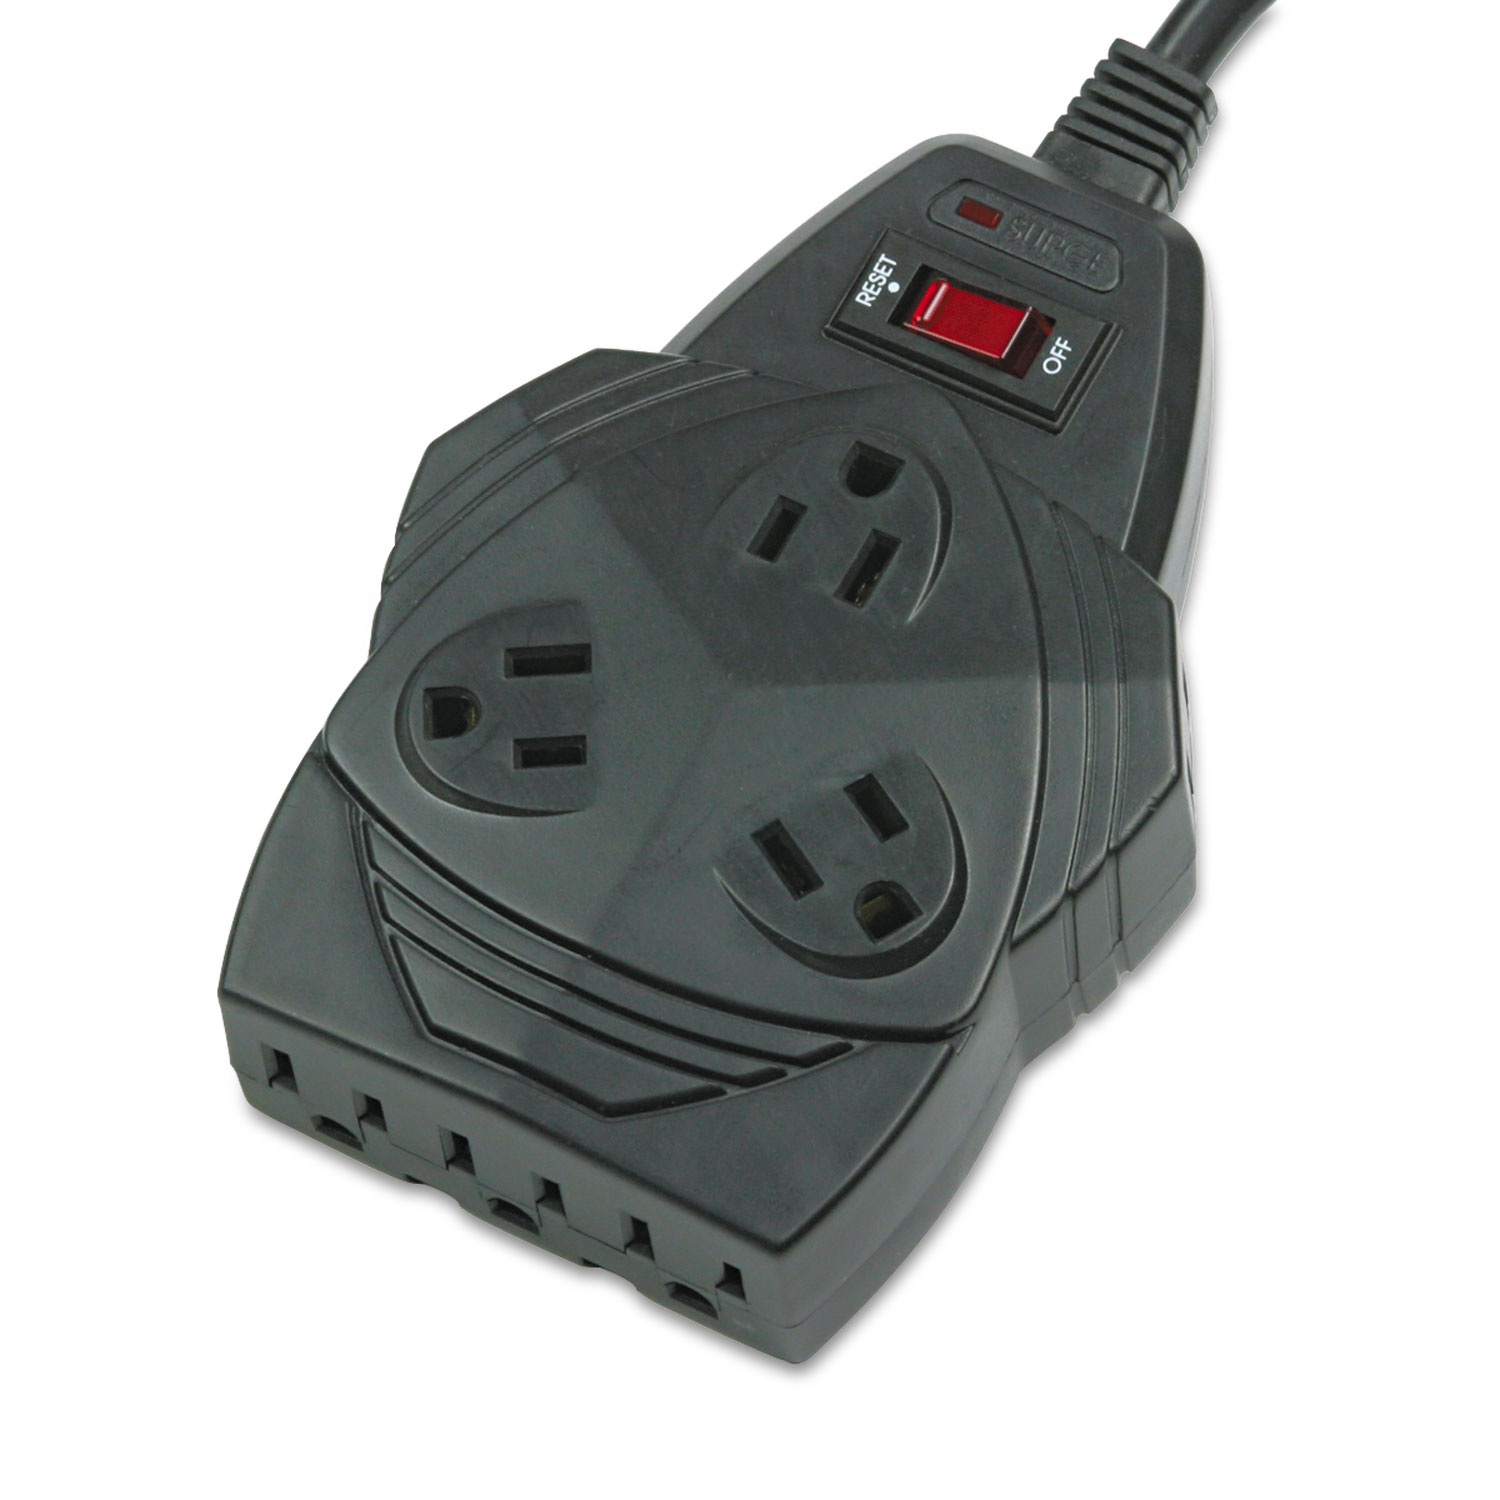  Fellowes 99090 Mighty 8 Surge Protector, 8 Outlets, 6 ft Cord, 1300 Joules, Black (FEL99090) 